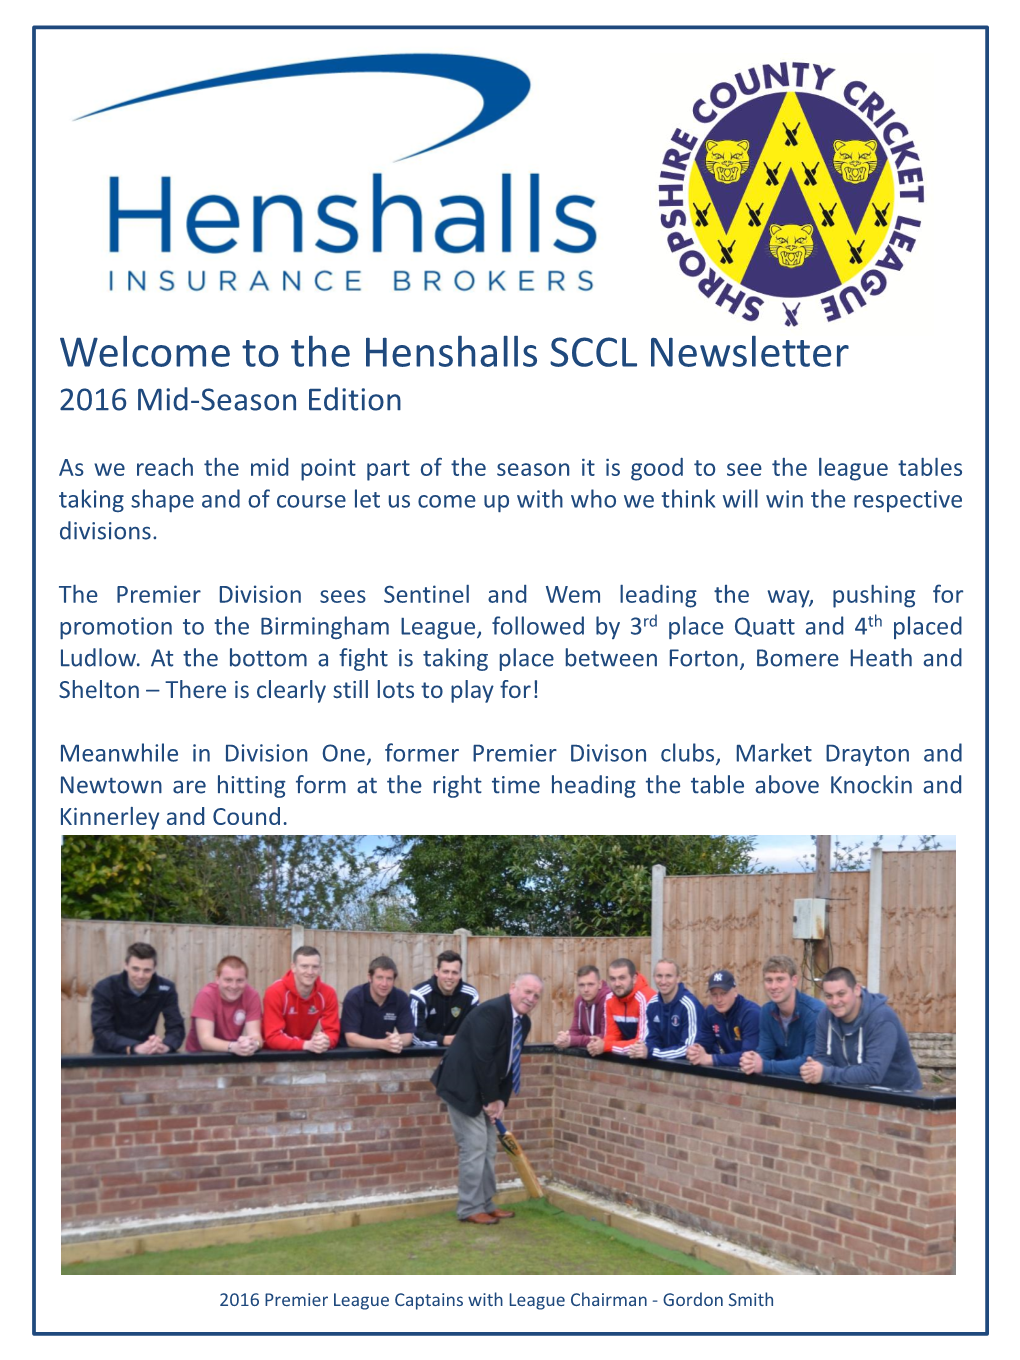 The Henshalls SCCL Newsletter 2016 Mid-Season Edition